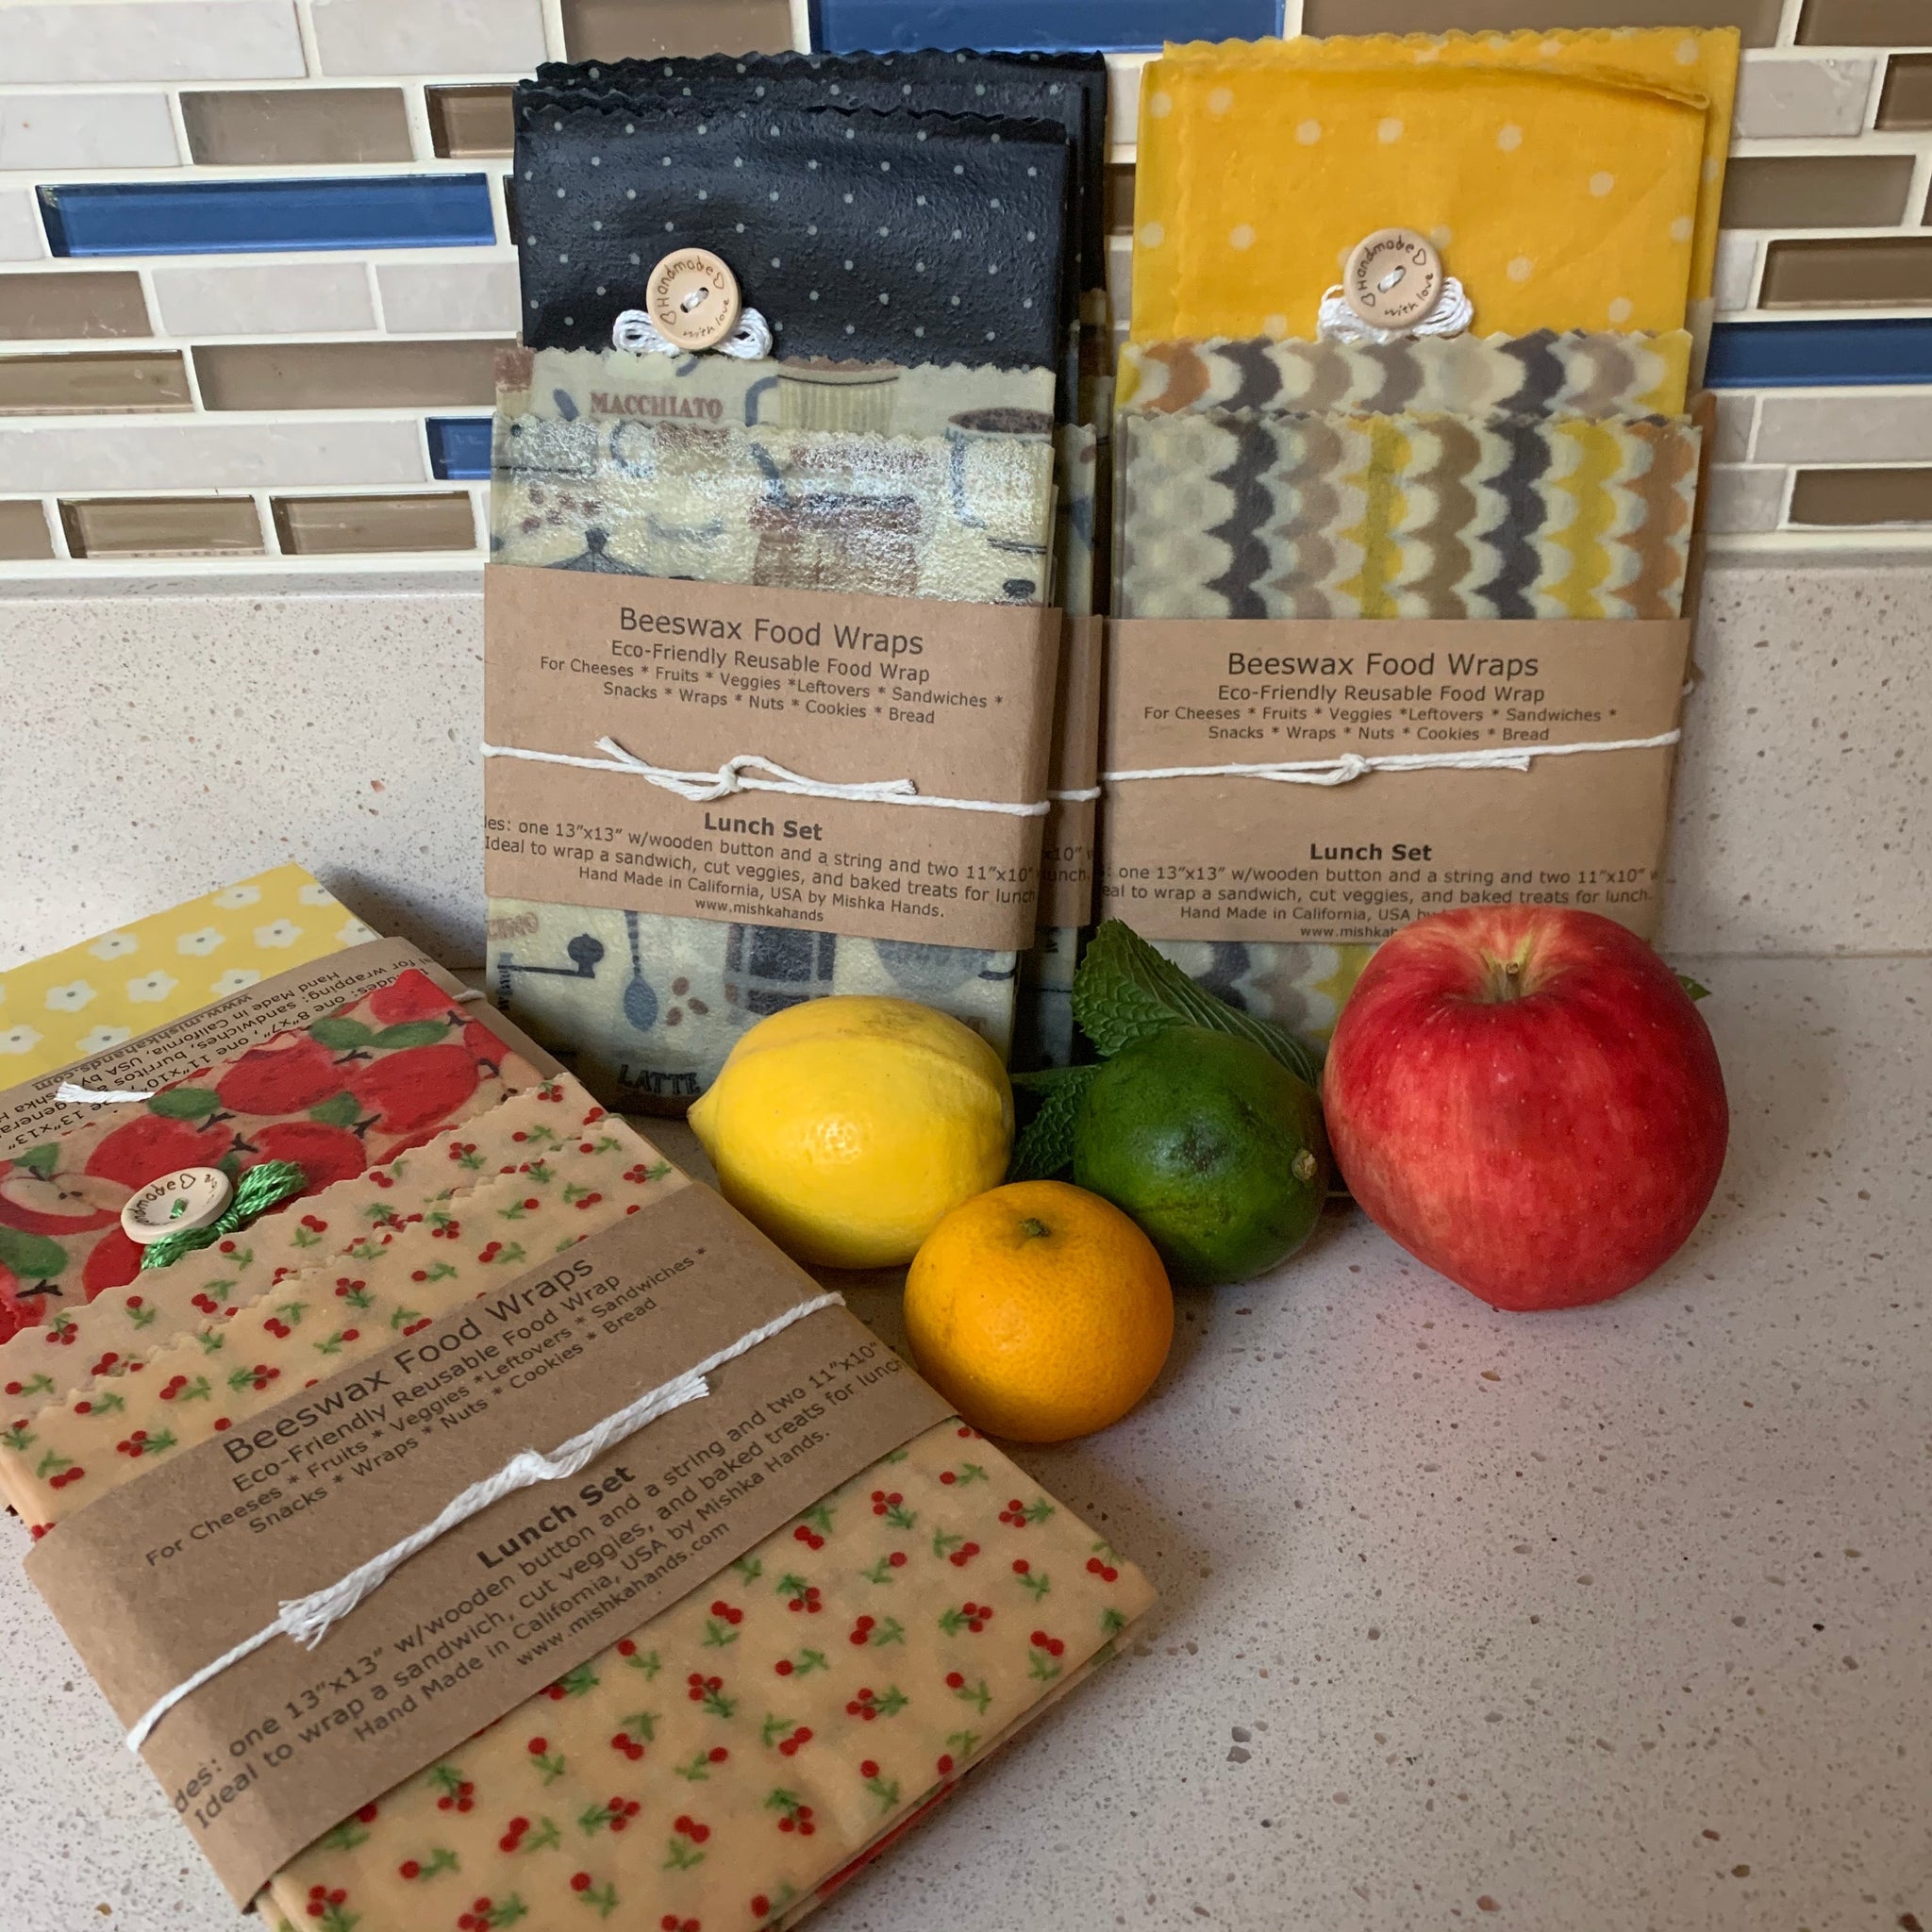 Beeswax Wrap - cooking set